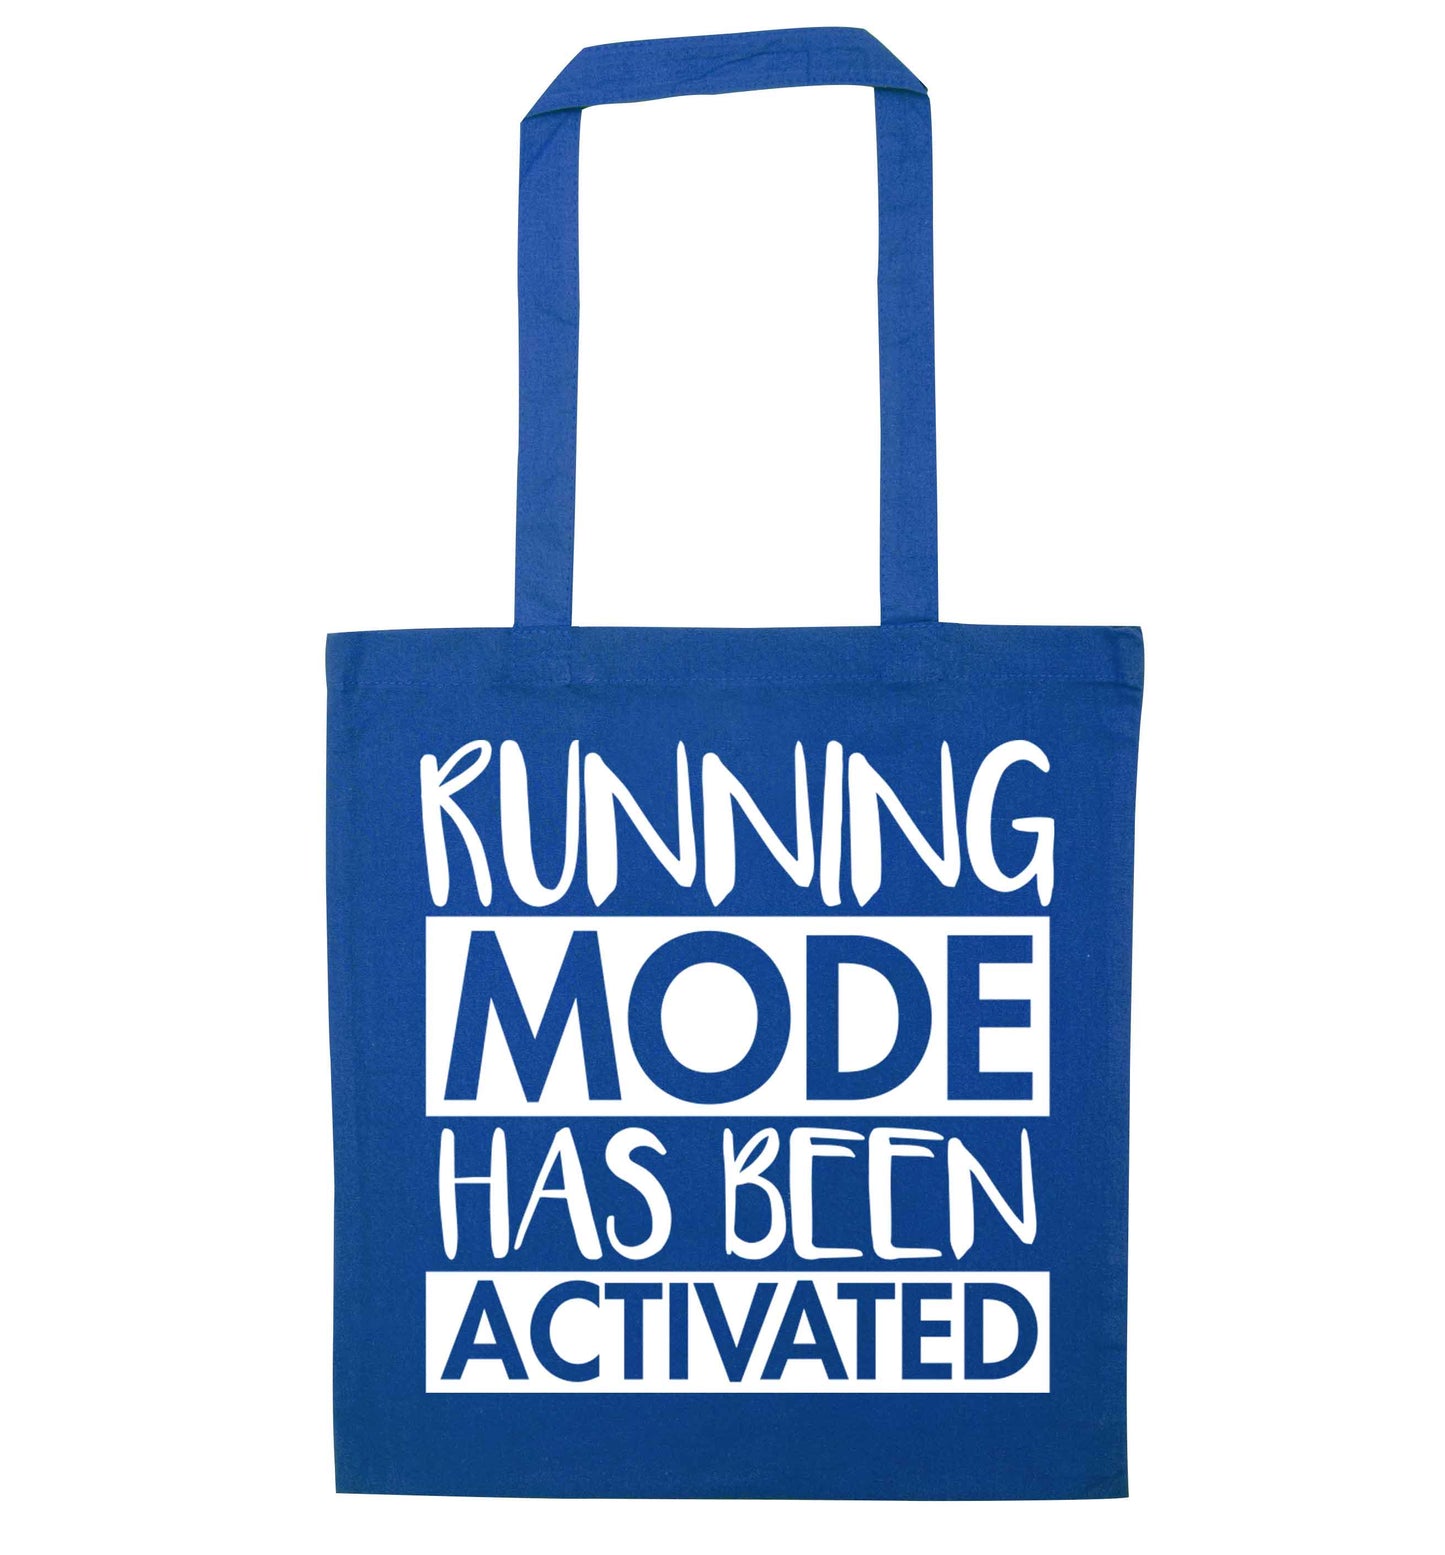 Running mode has been activated blue tote bag